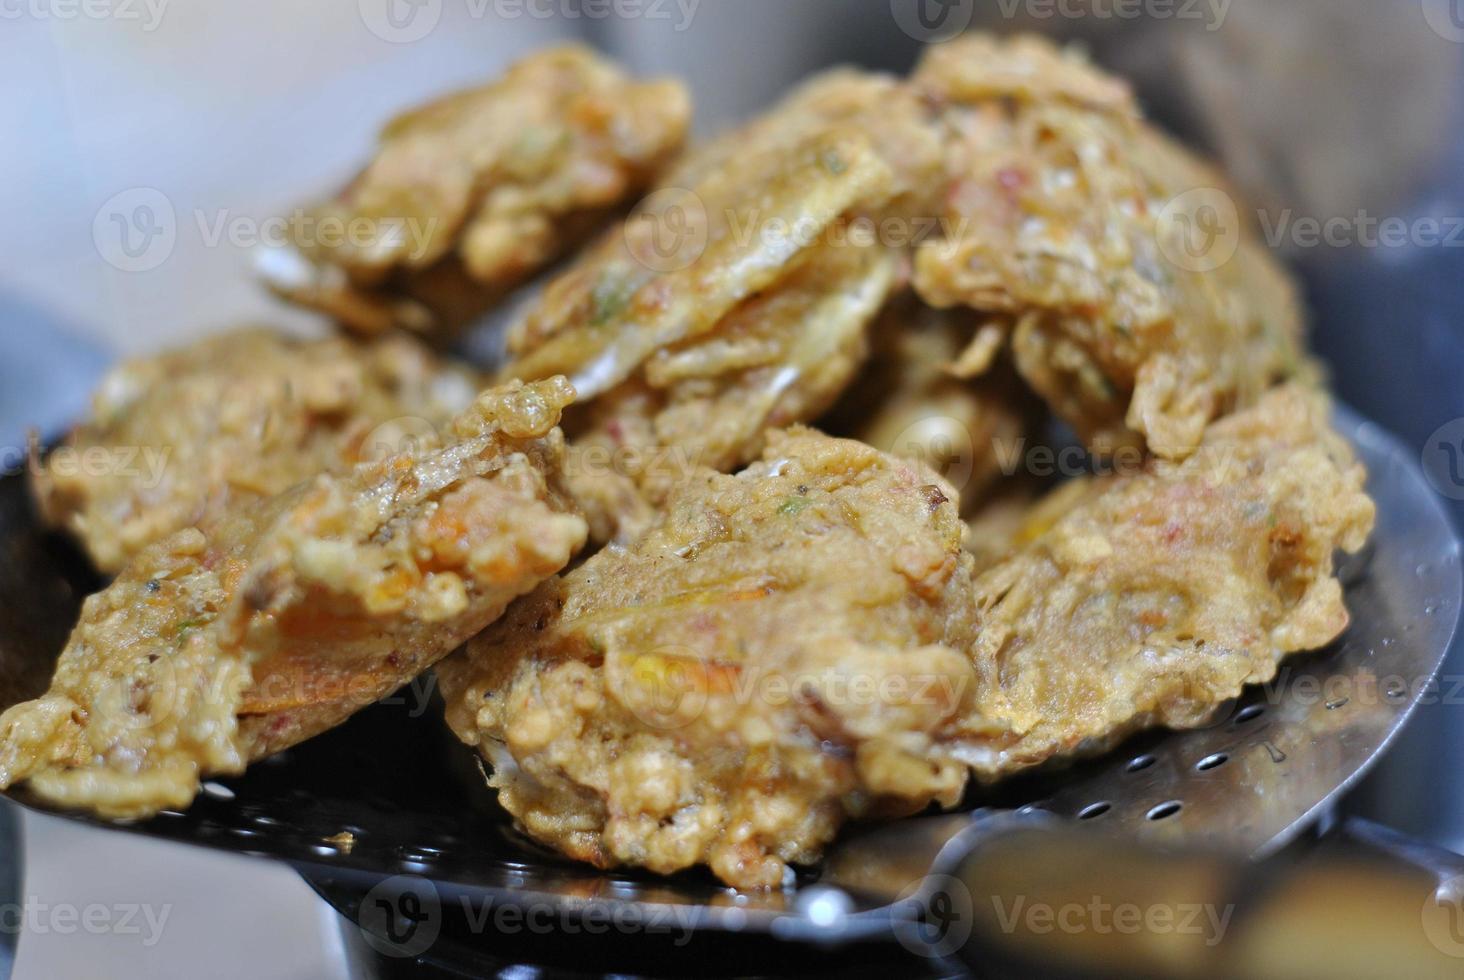 Bakwan is typical traditional snacks of Asian Indonesian people. The ingredients are vegetables, usually, shredded cabbages and carrots, battered and deep fried in cooking oil. photo